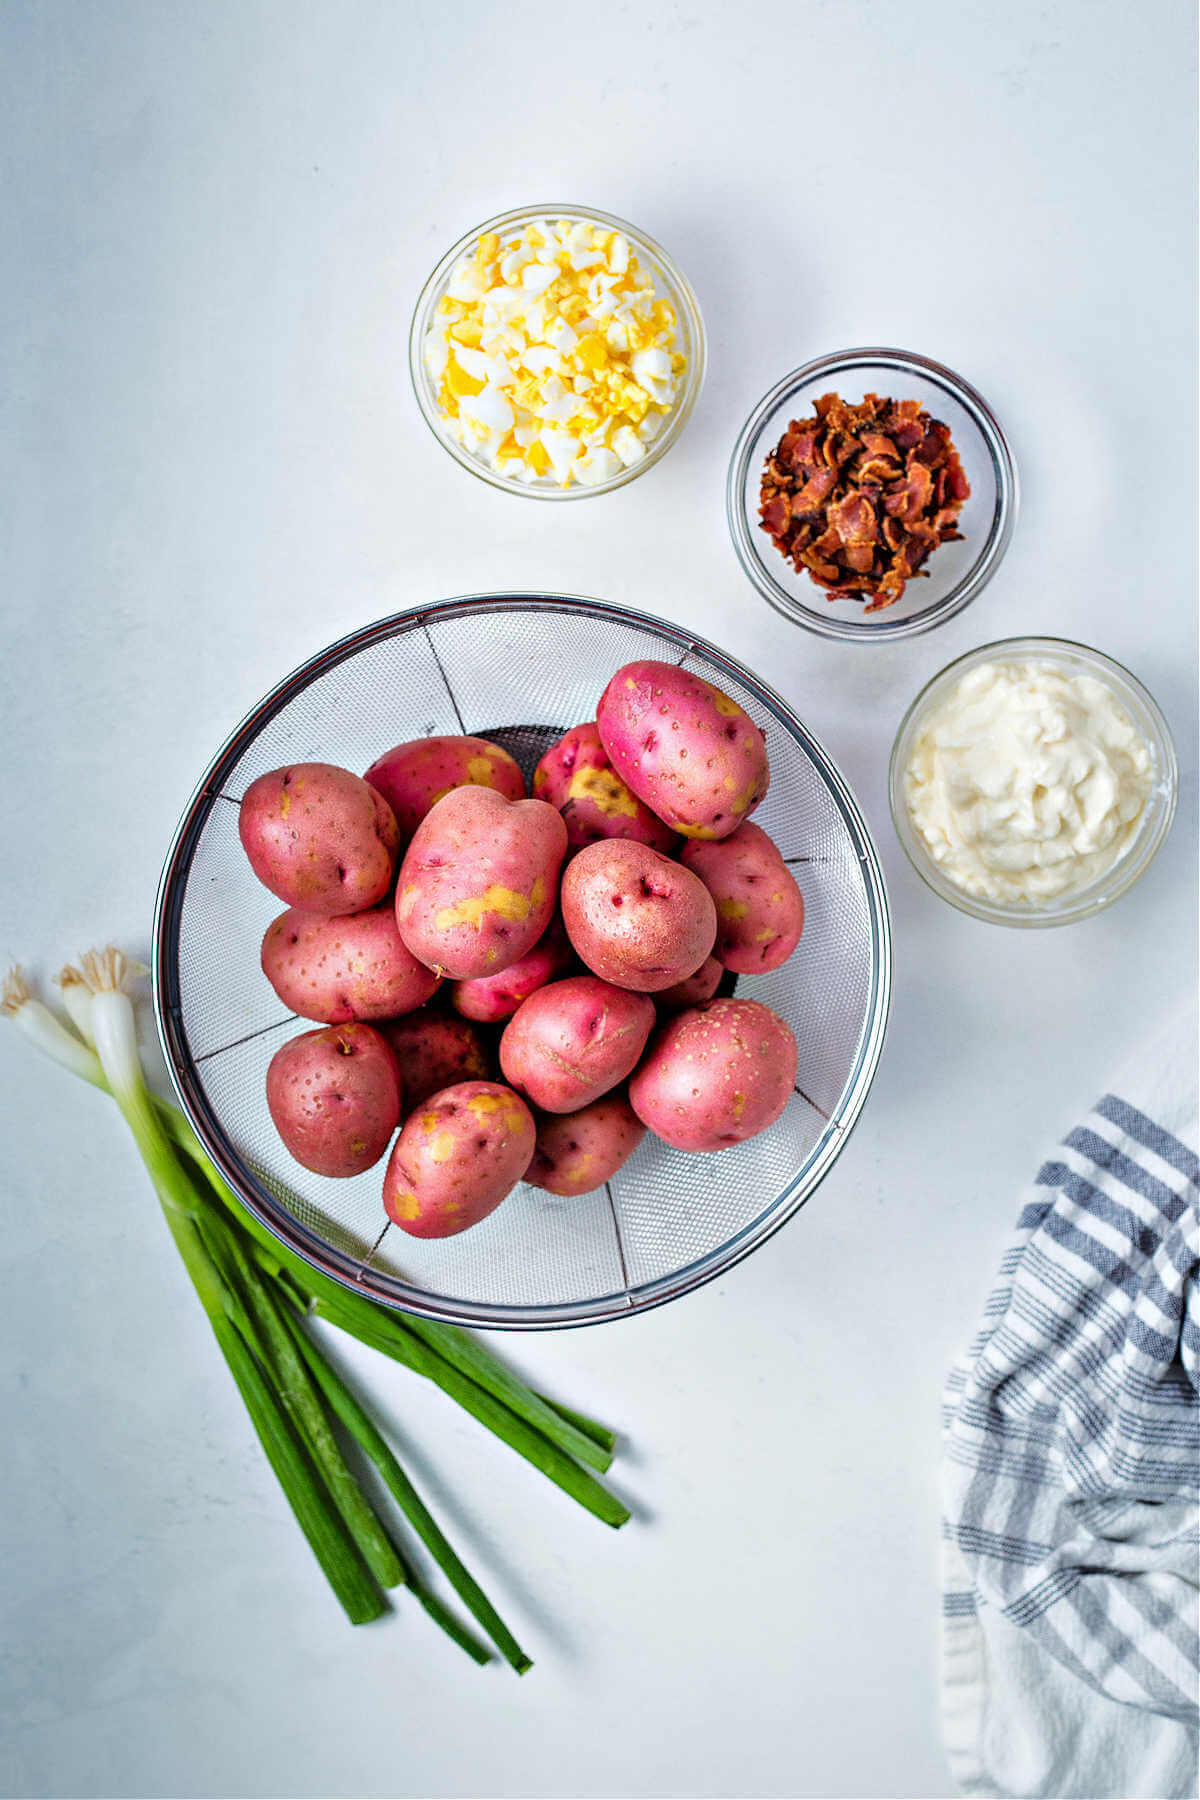 ingredients for red potato salad on a table.